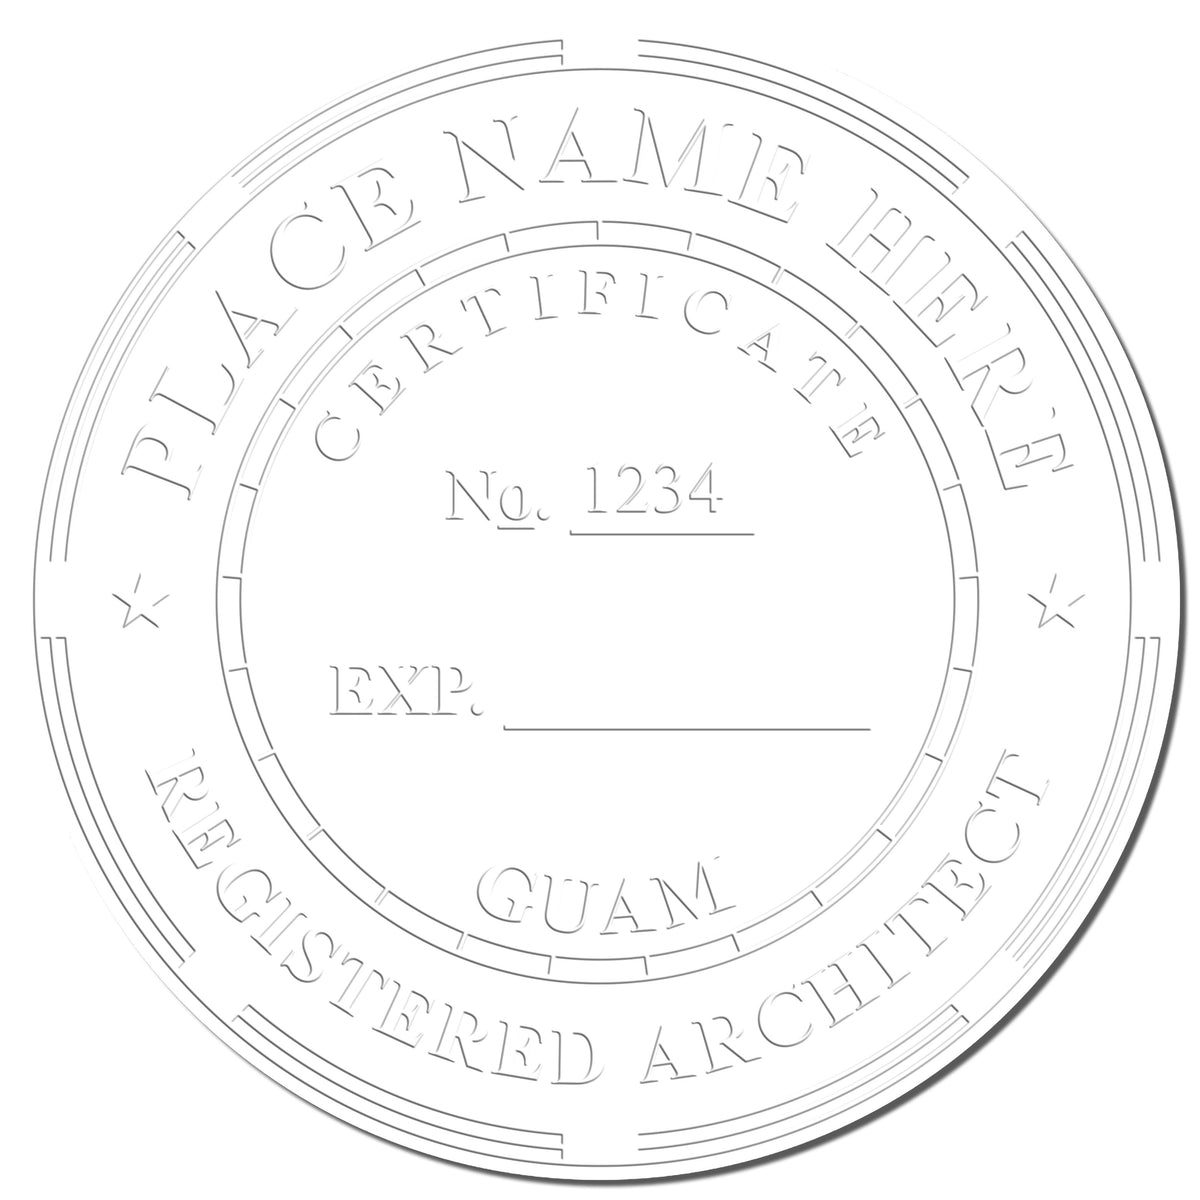 This paper is stamped with a sample imprint of the Hybrid Guam Architect Seal, signifying its quality and reliability.